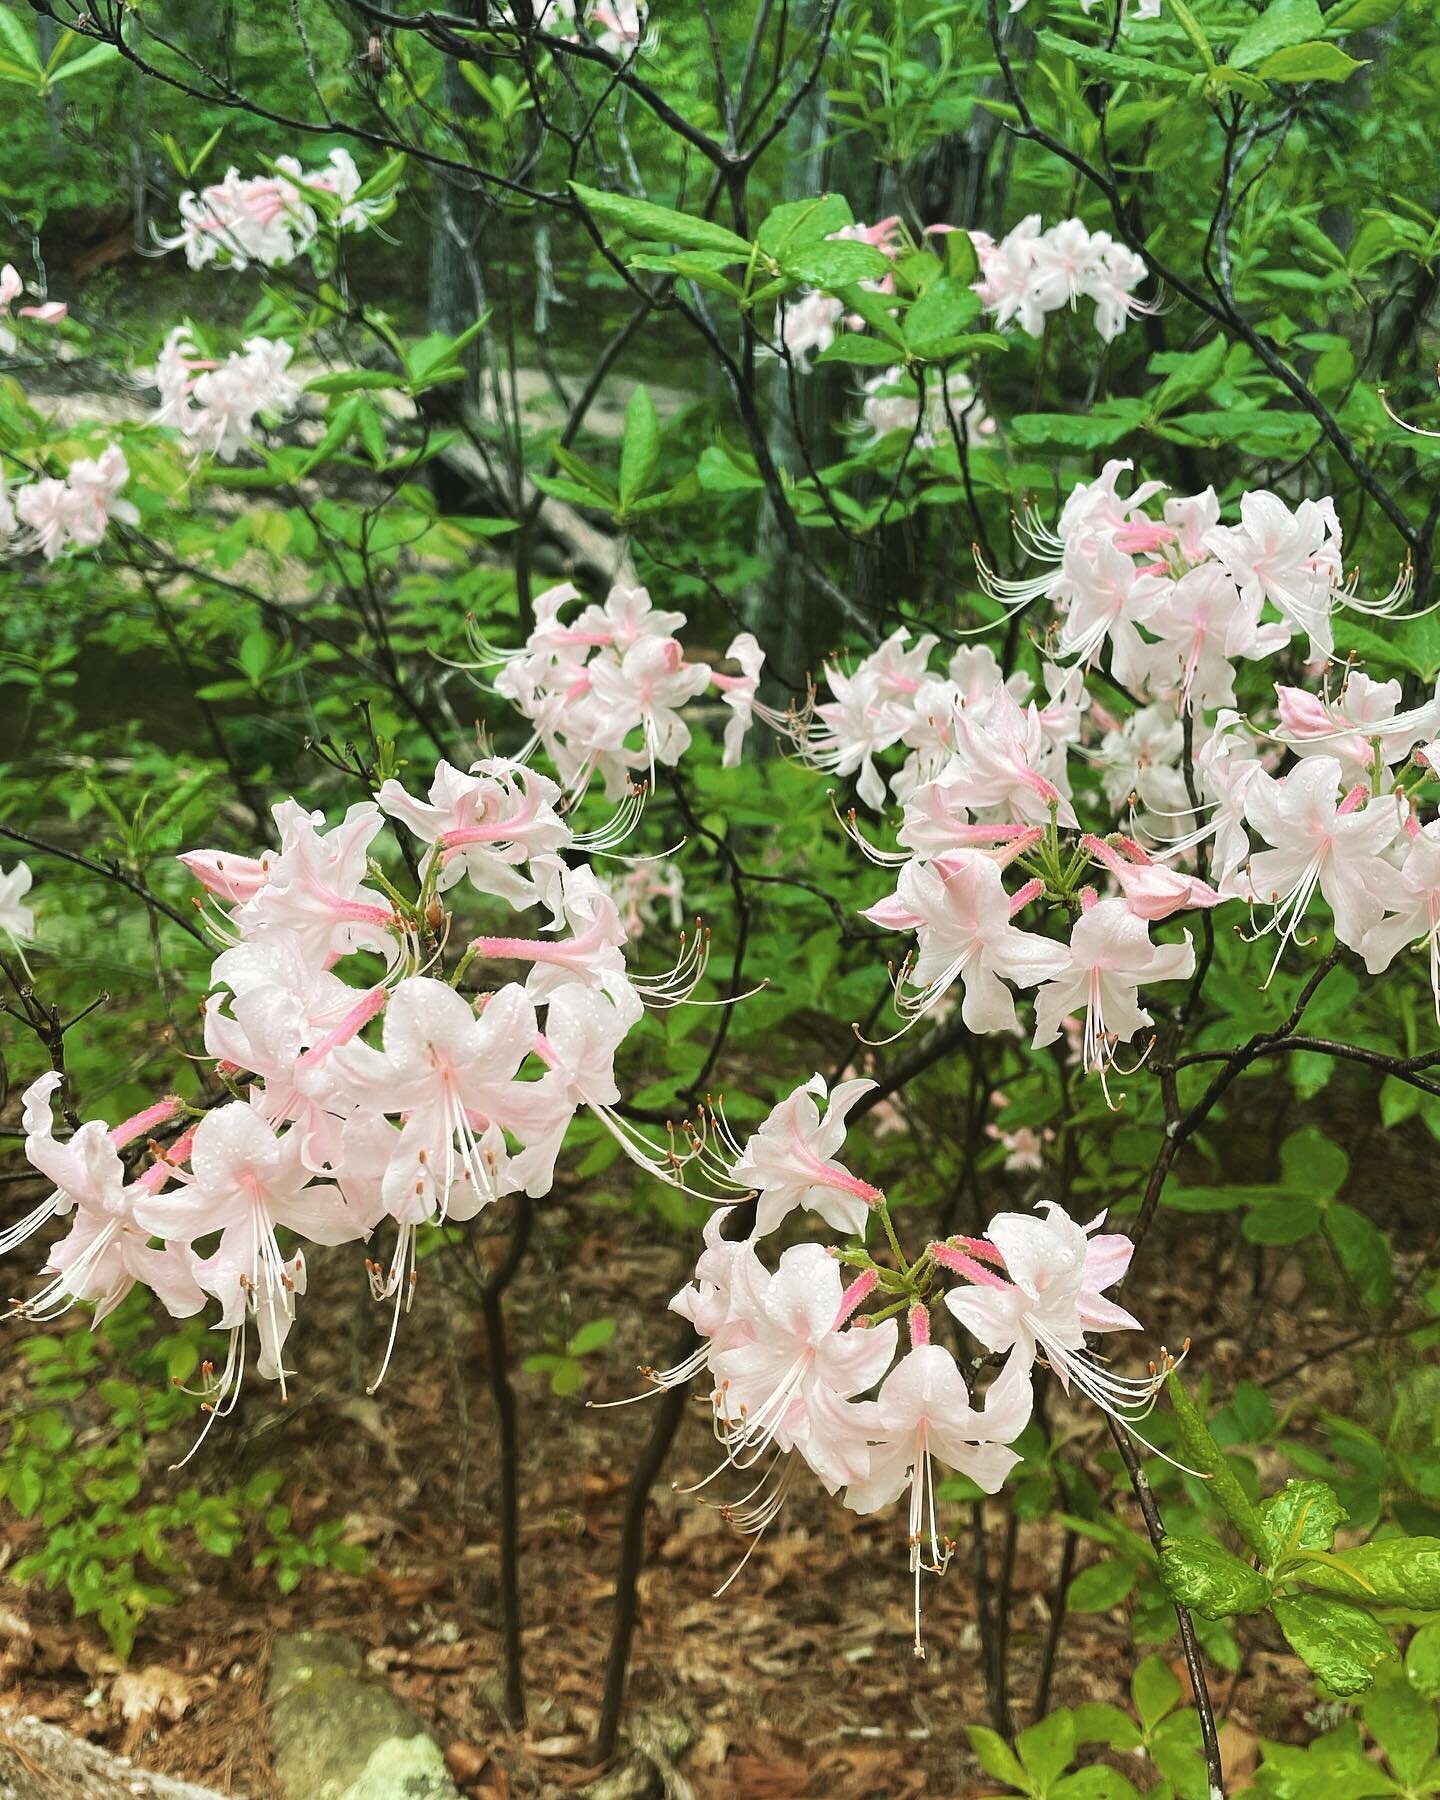 It&rsquo;s azalea time at Hawn State Park! This azalea is special because it thrives in one specific place&mdash;and that&rsquo;s in those woods, not here in the city! But we have lots of woodland native plants that will work beautifully in our city 